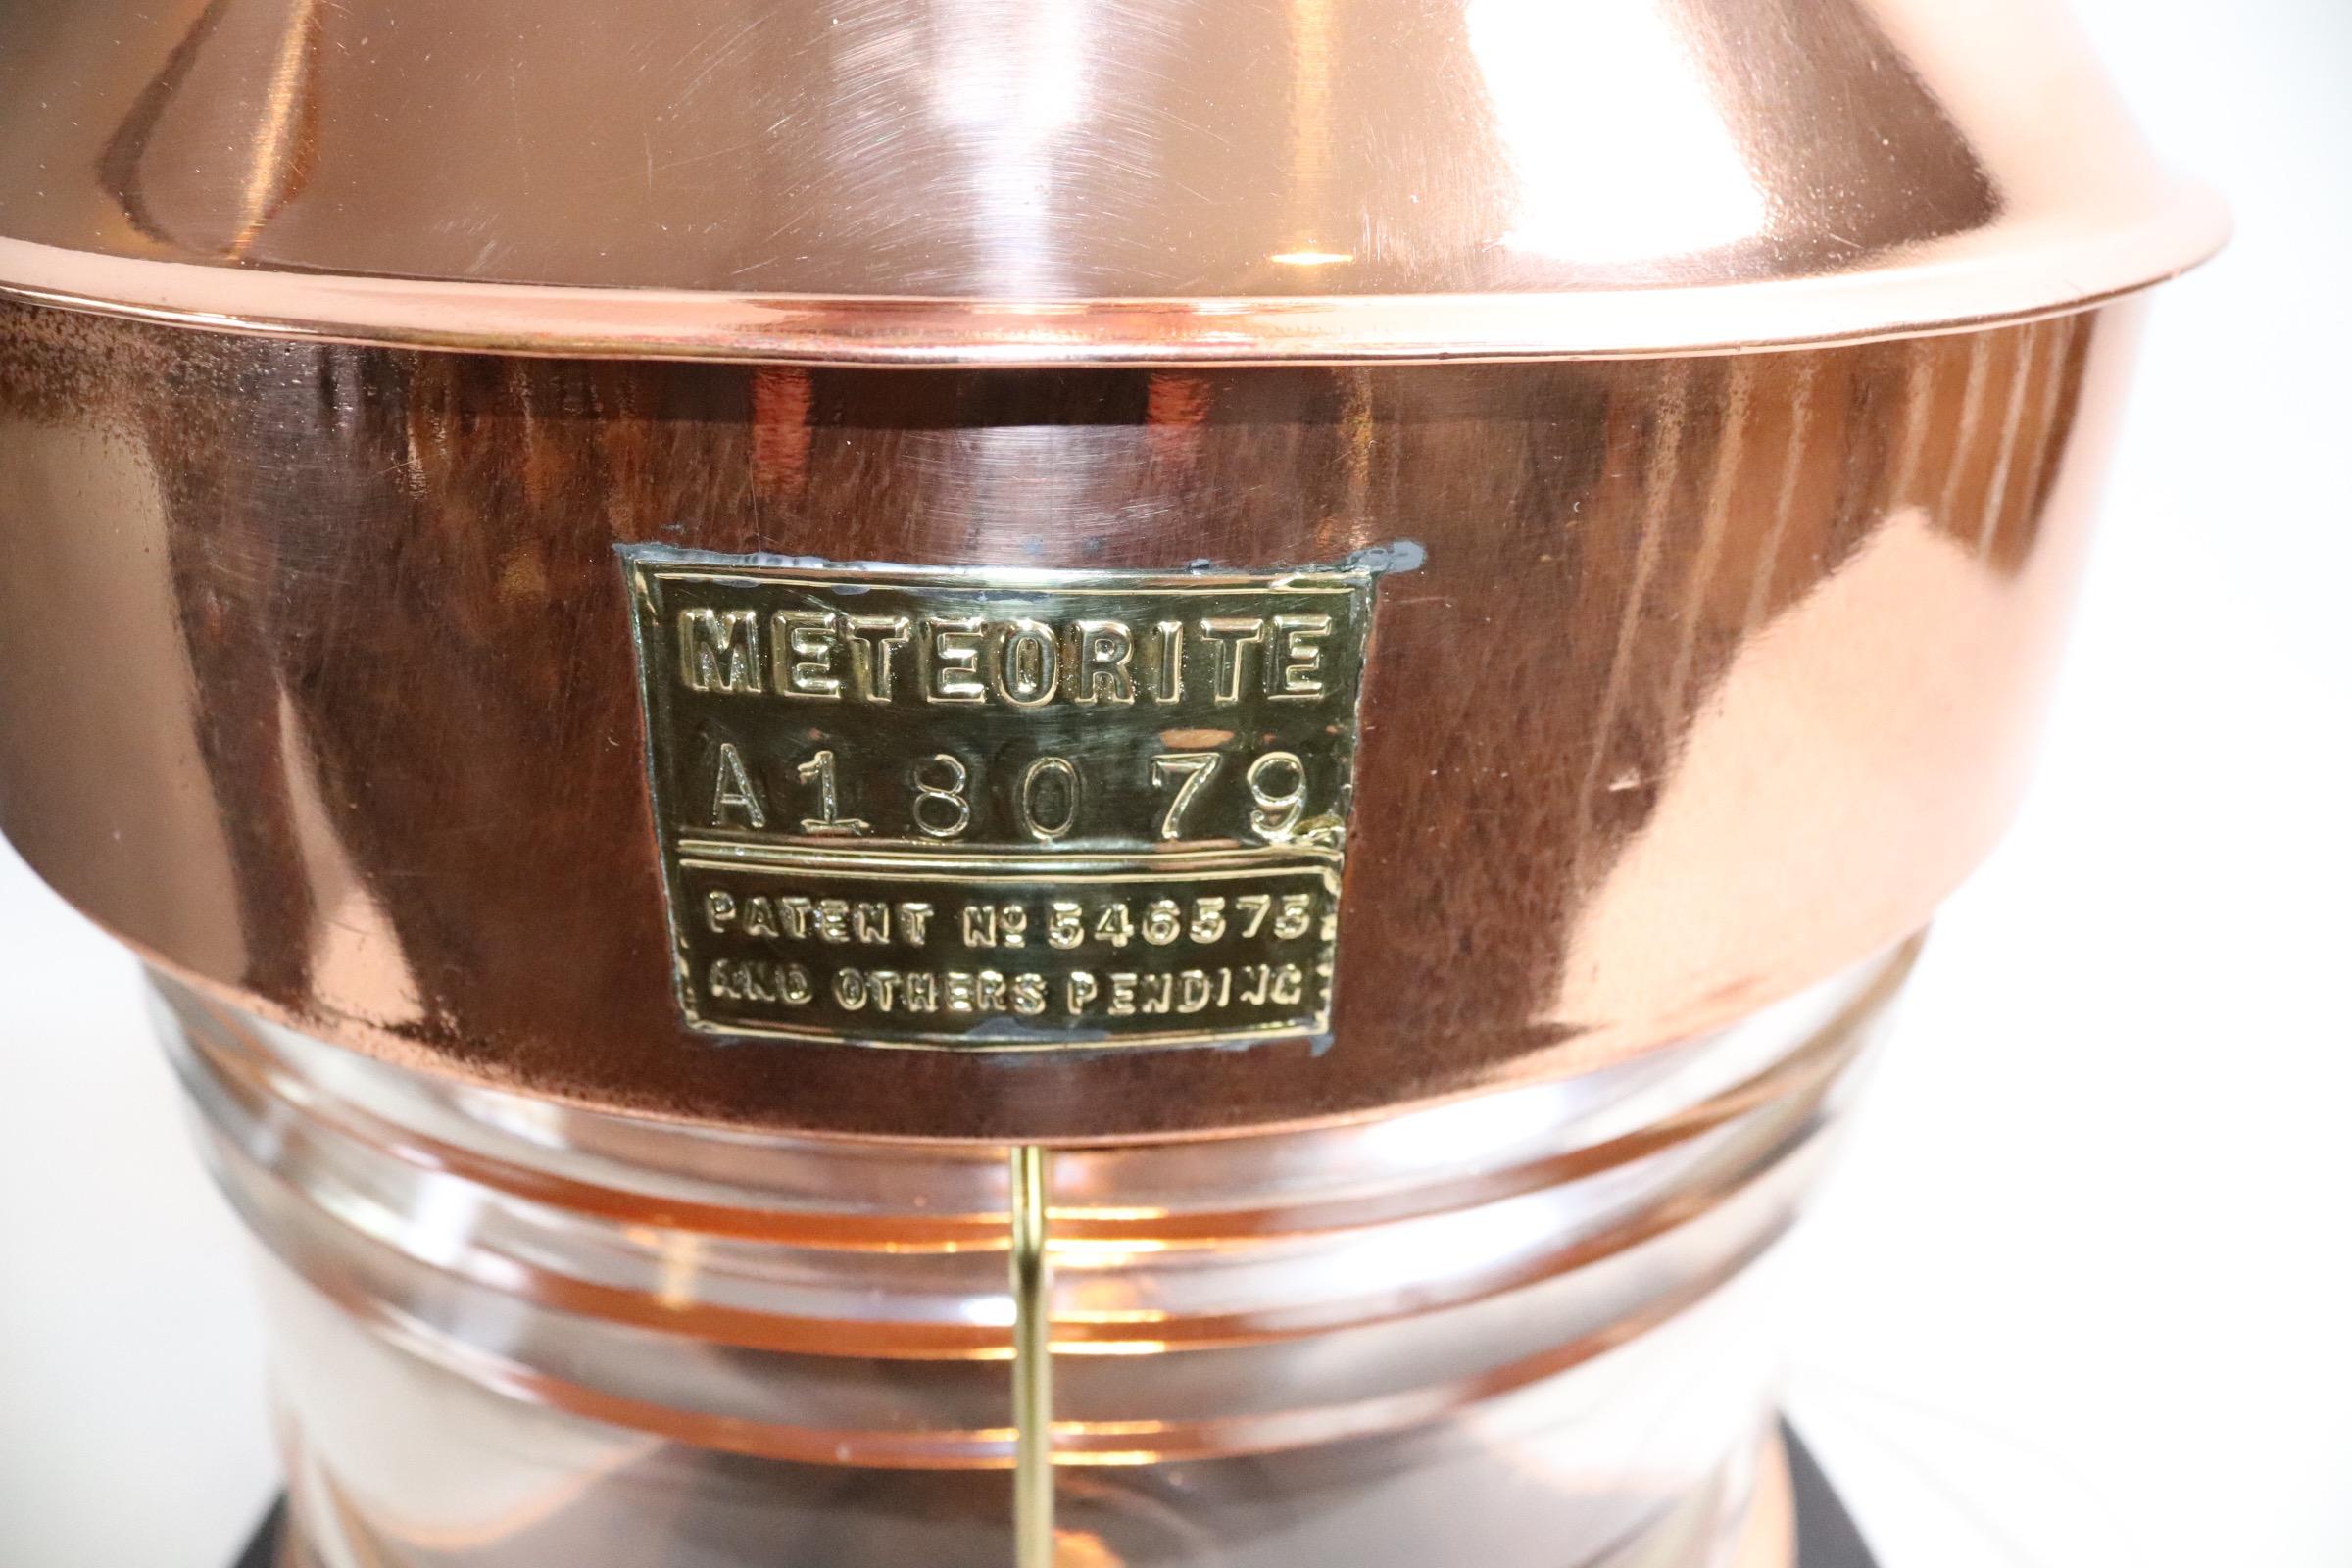 Outstanding copper ships masthead lantern by the English firm Meteorite. With clear Fresnel glass lens, brass makers badge with serial number A18079. With heavy brass hoisting handle. Mounted to a thick custom wood base with dark finish. Wired with